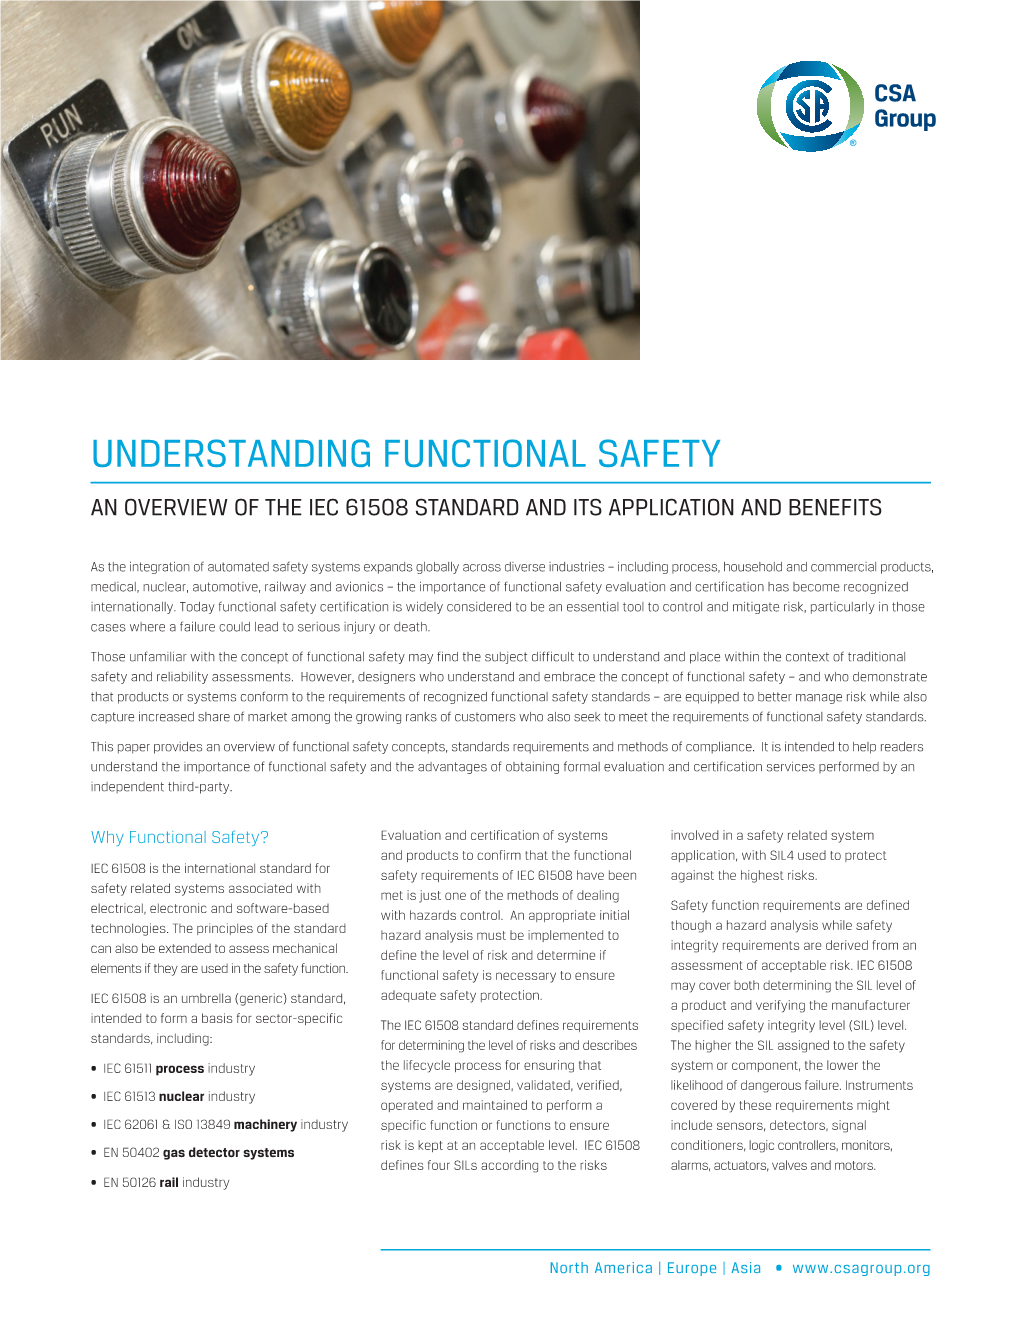 Understanding Functional Safety an Overview of the Iec 61508 Standard and Its Application and Benefits